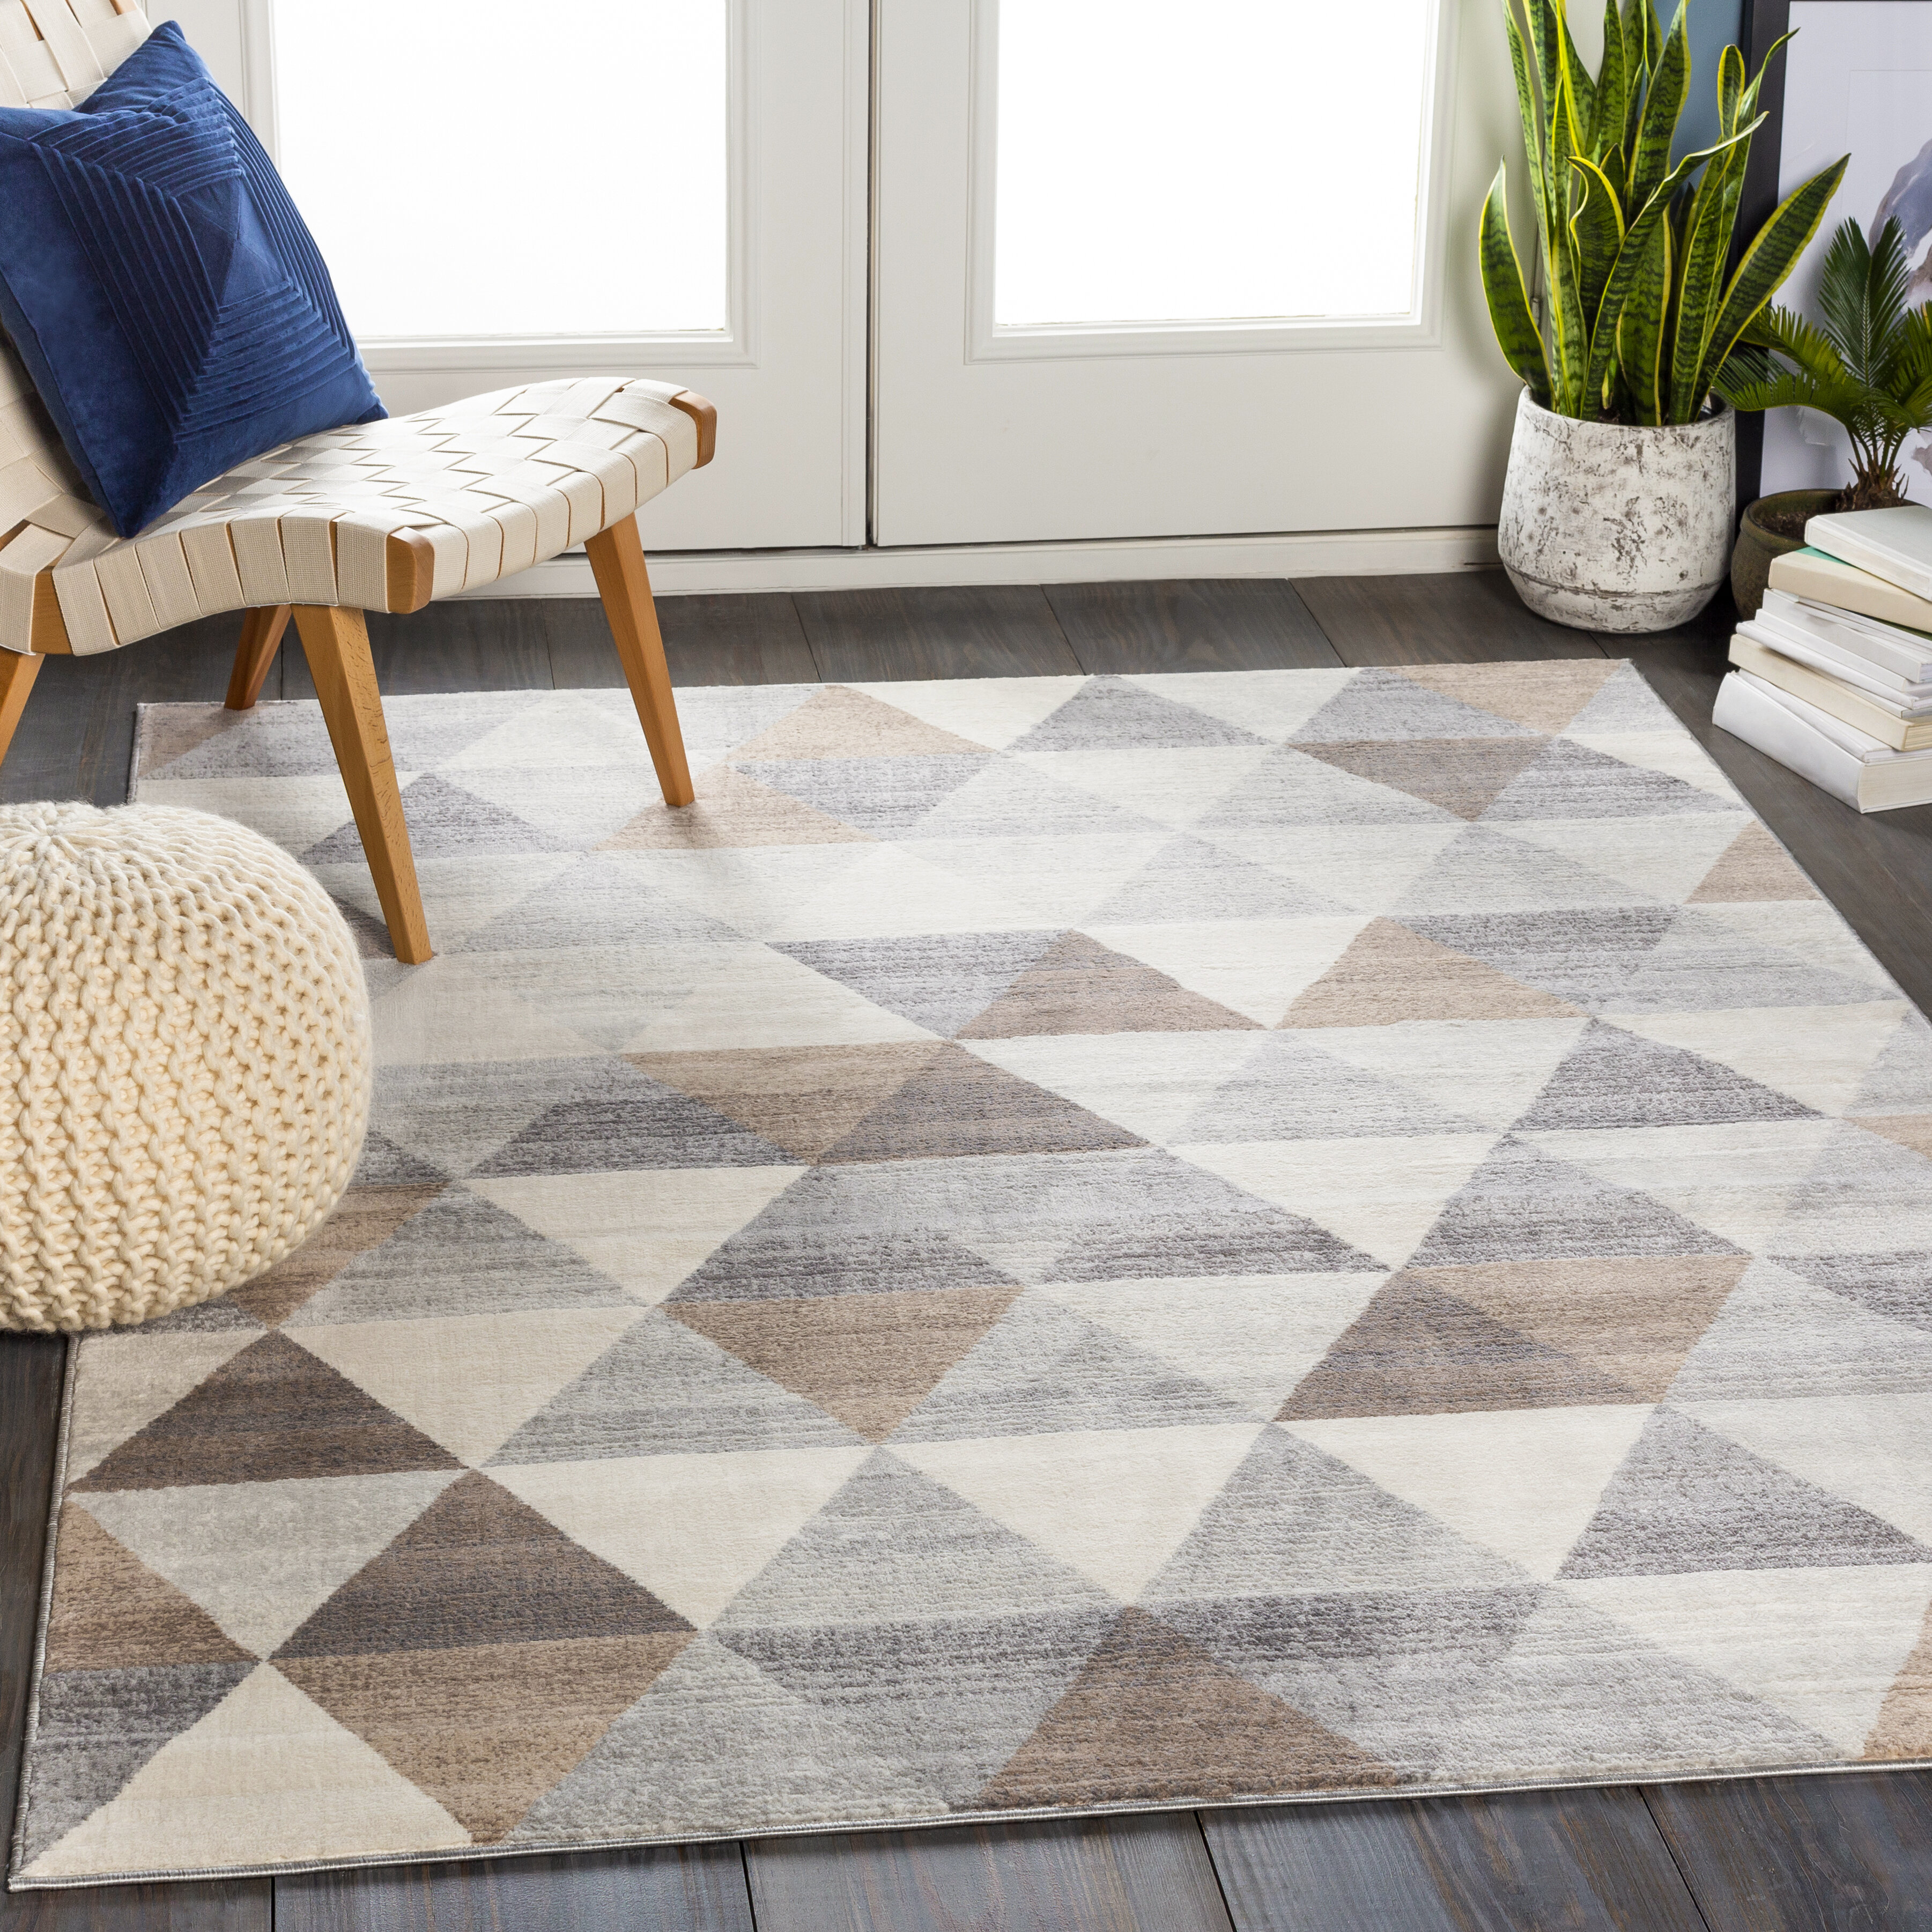 Silver Grey Living Room Rugs Cheap Small Large Geometric Rugs Long Hall Runners 